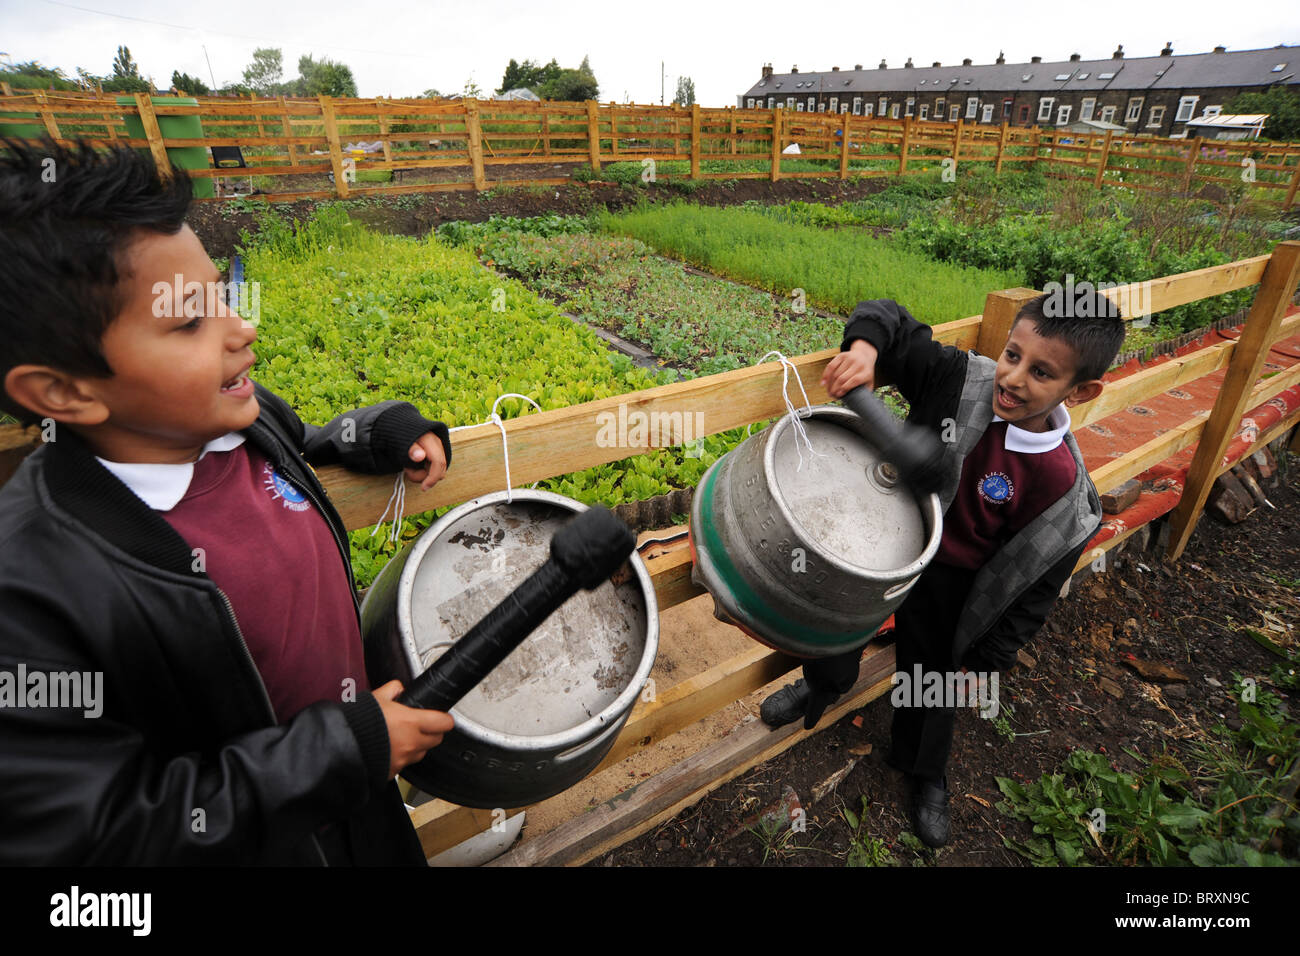 Children play drums made from old beer kegs during a visit to local allotments, Bradford, West Yorkshire Stock Photo